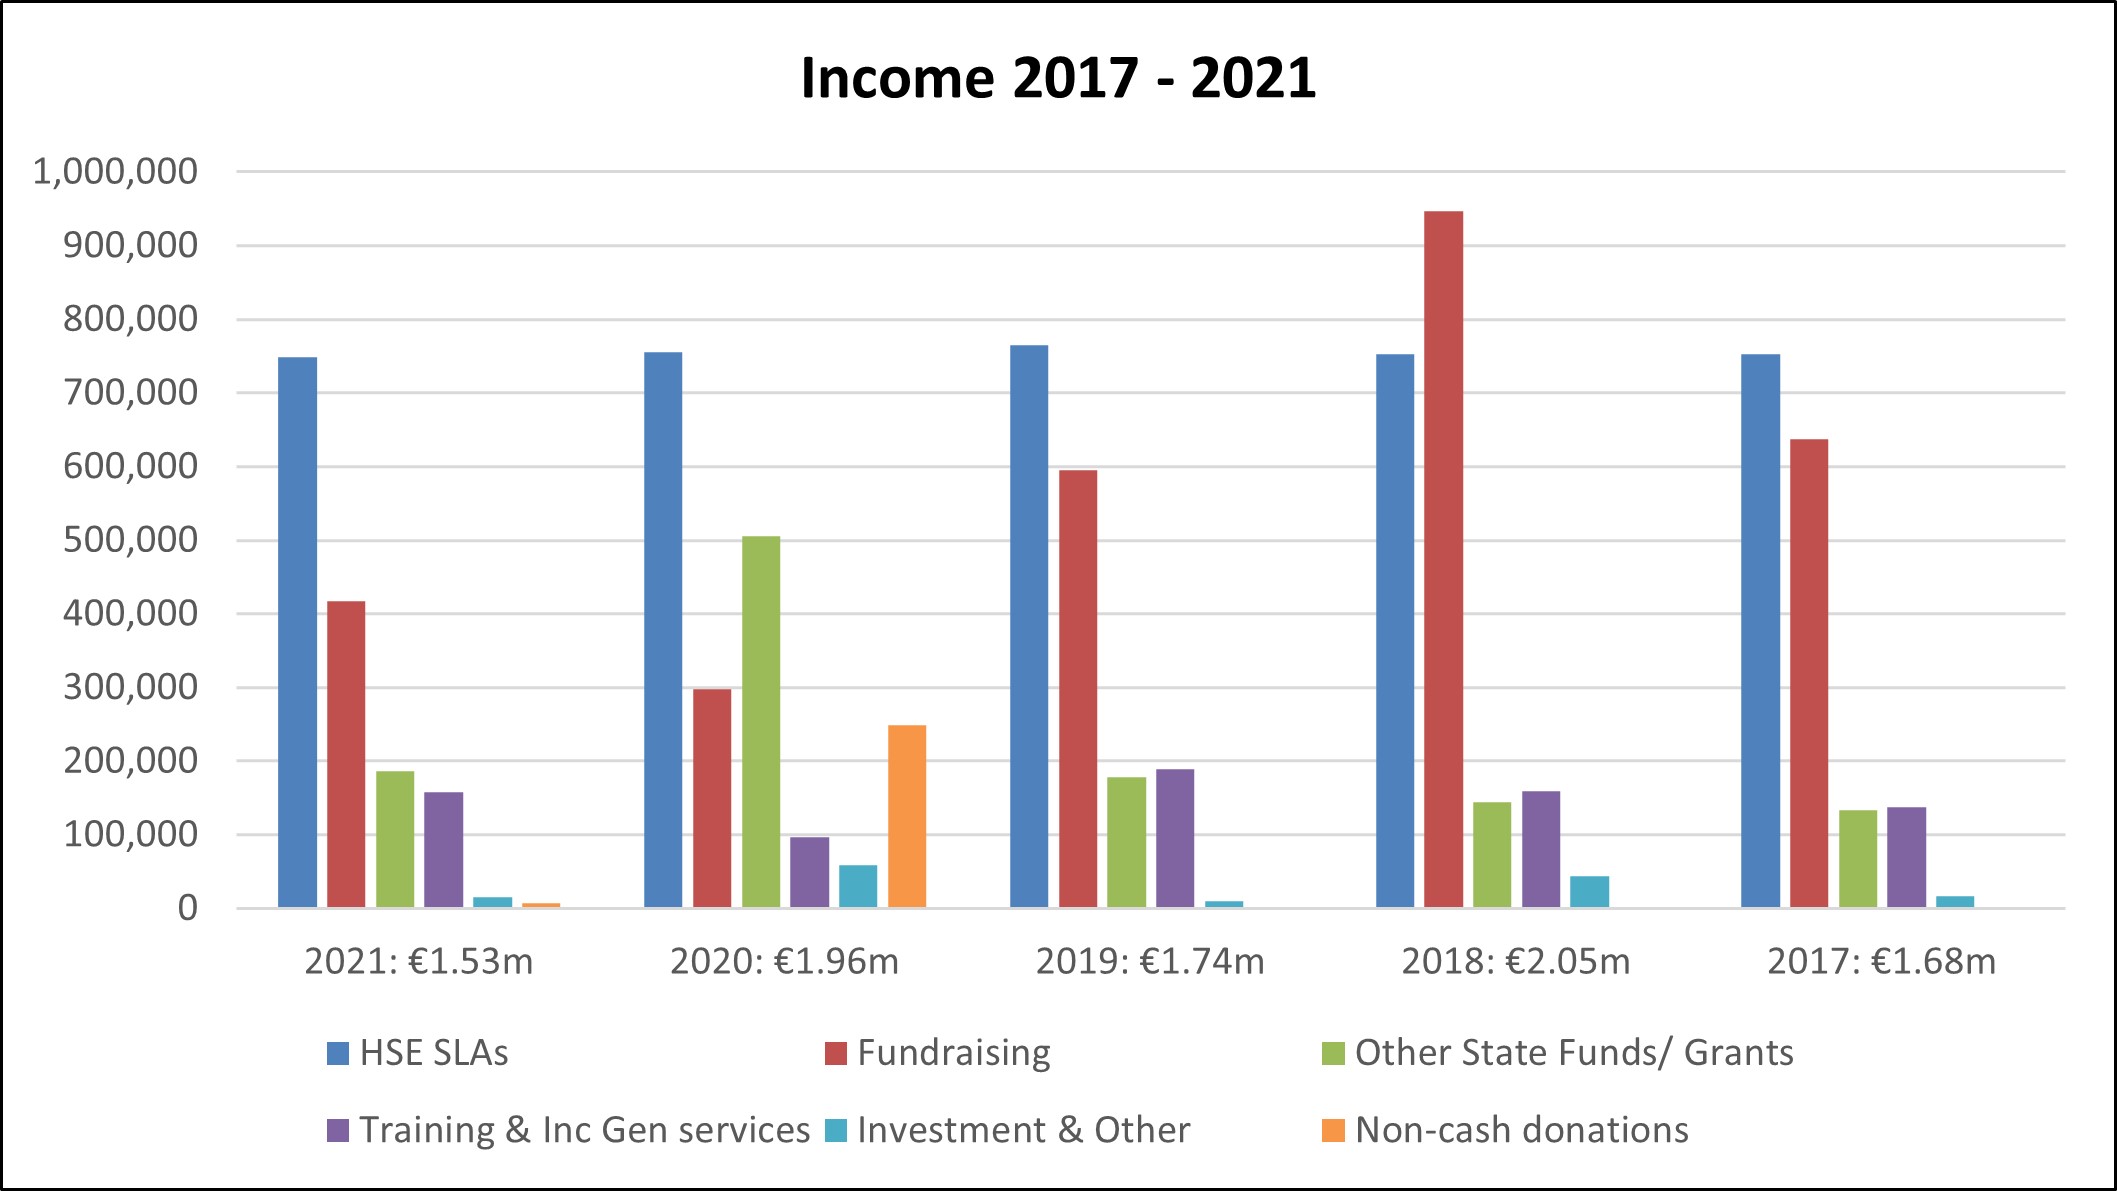 Chart showing Epilepsy Ireland income over the last 5 years